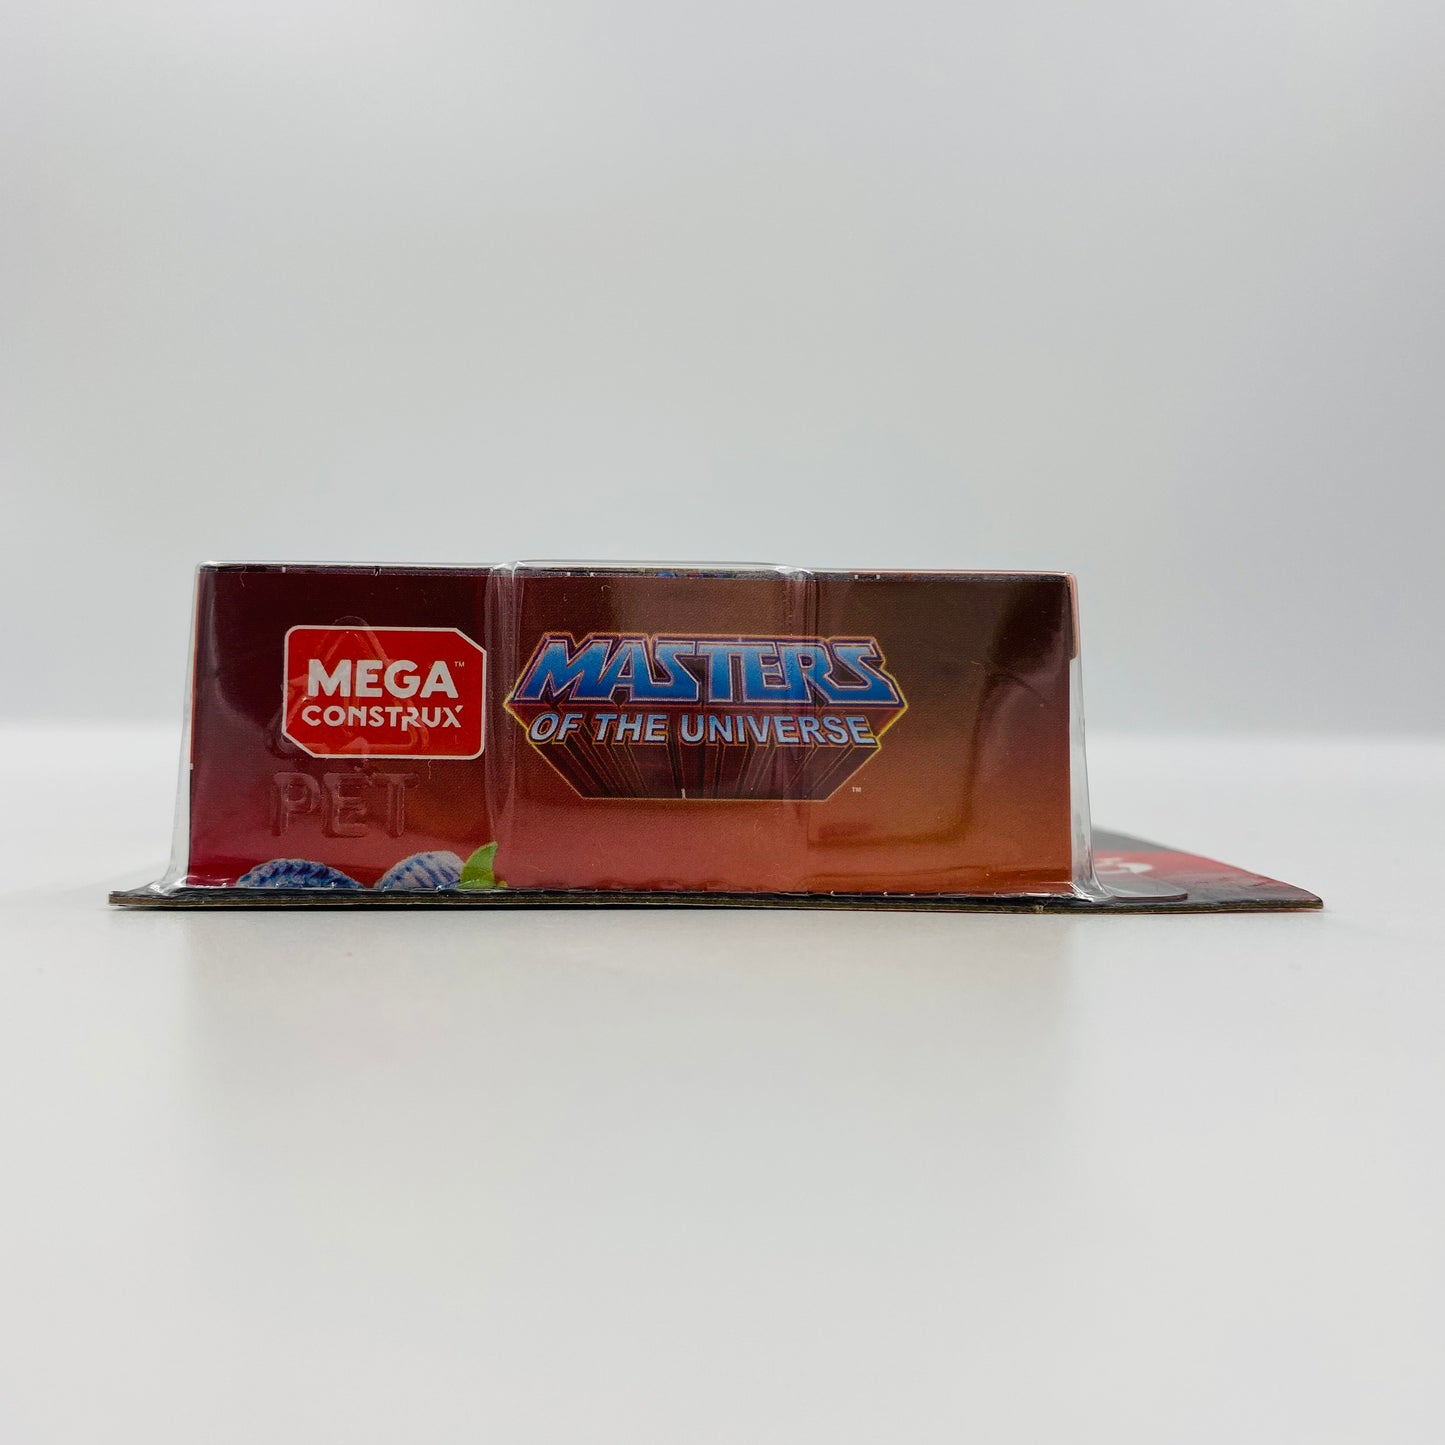 Mega Construx Masters of the Universe Stratos carded 2” micro action figure (2019) GCP70 Mattel